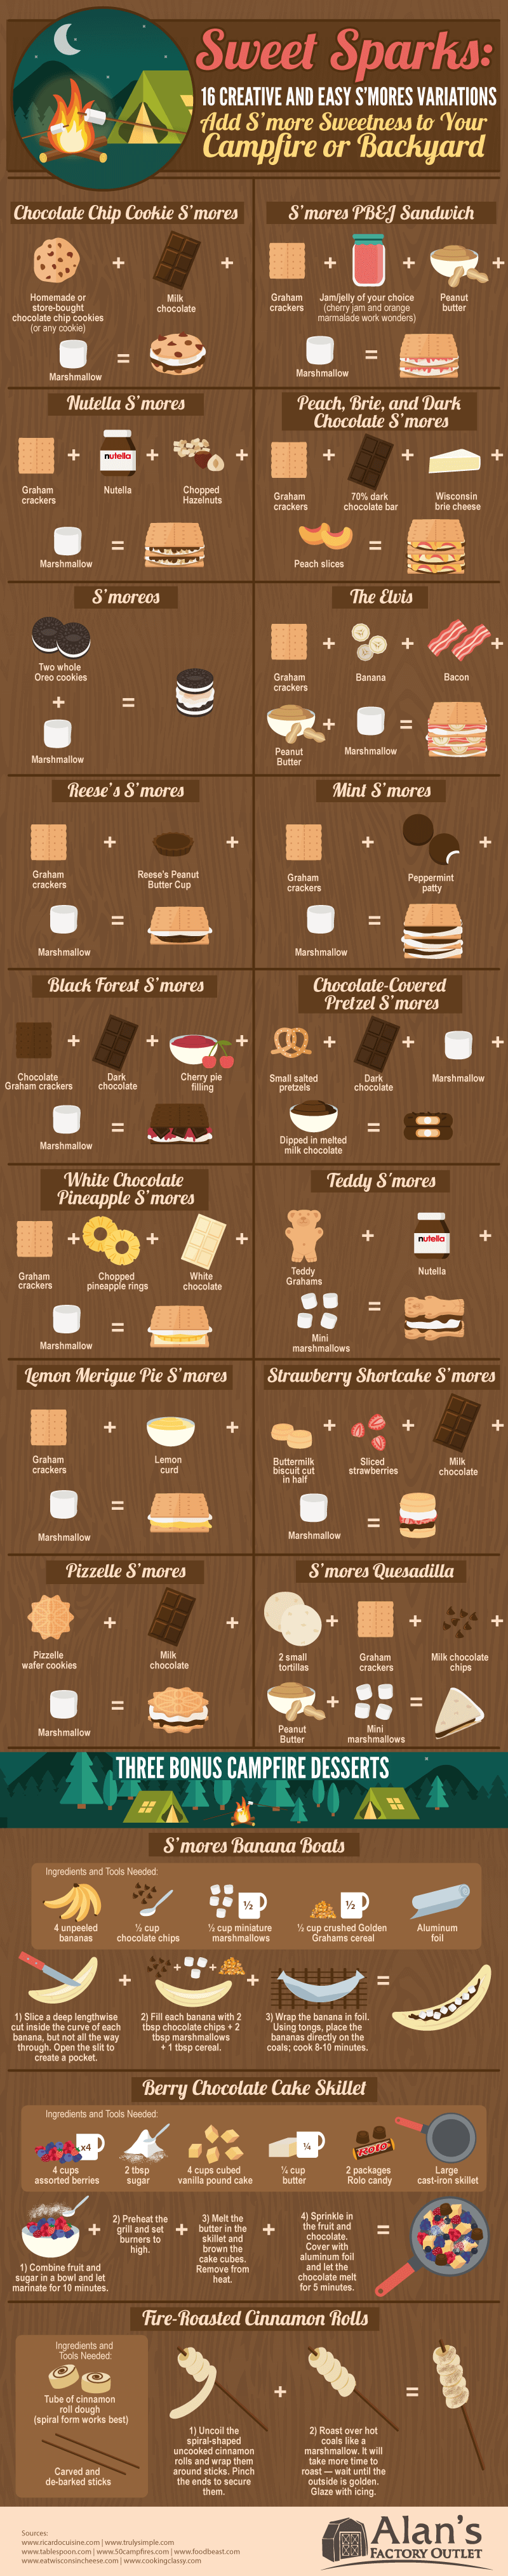 Sweet Sparks: 16 Creative and Easy S’Mores Variations